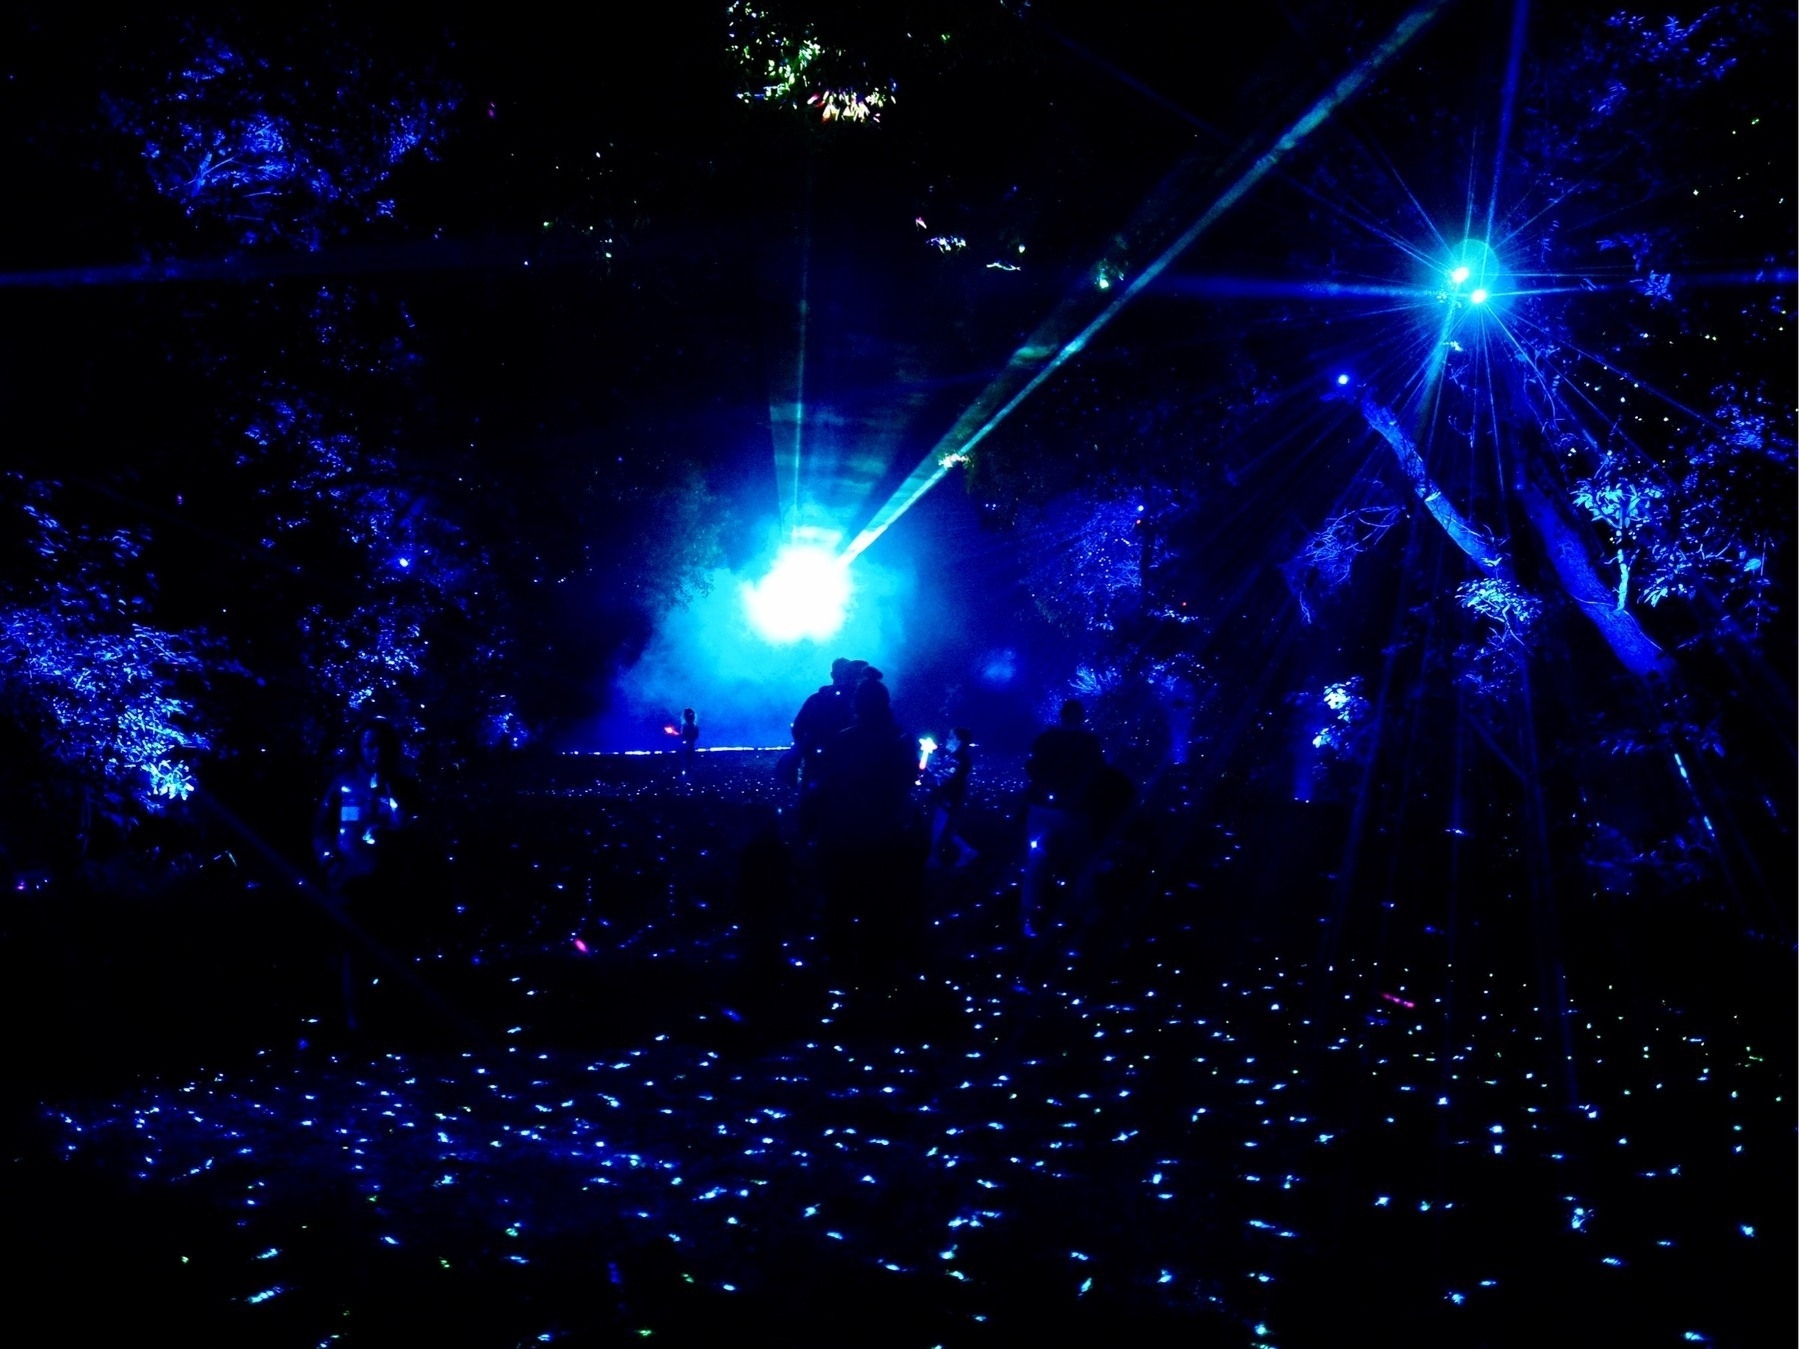 The effect of a starry night along a forest path with silhouettes of people in the distance